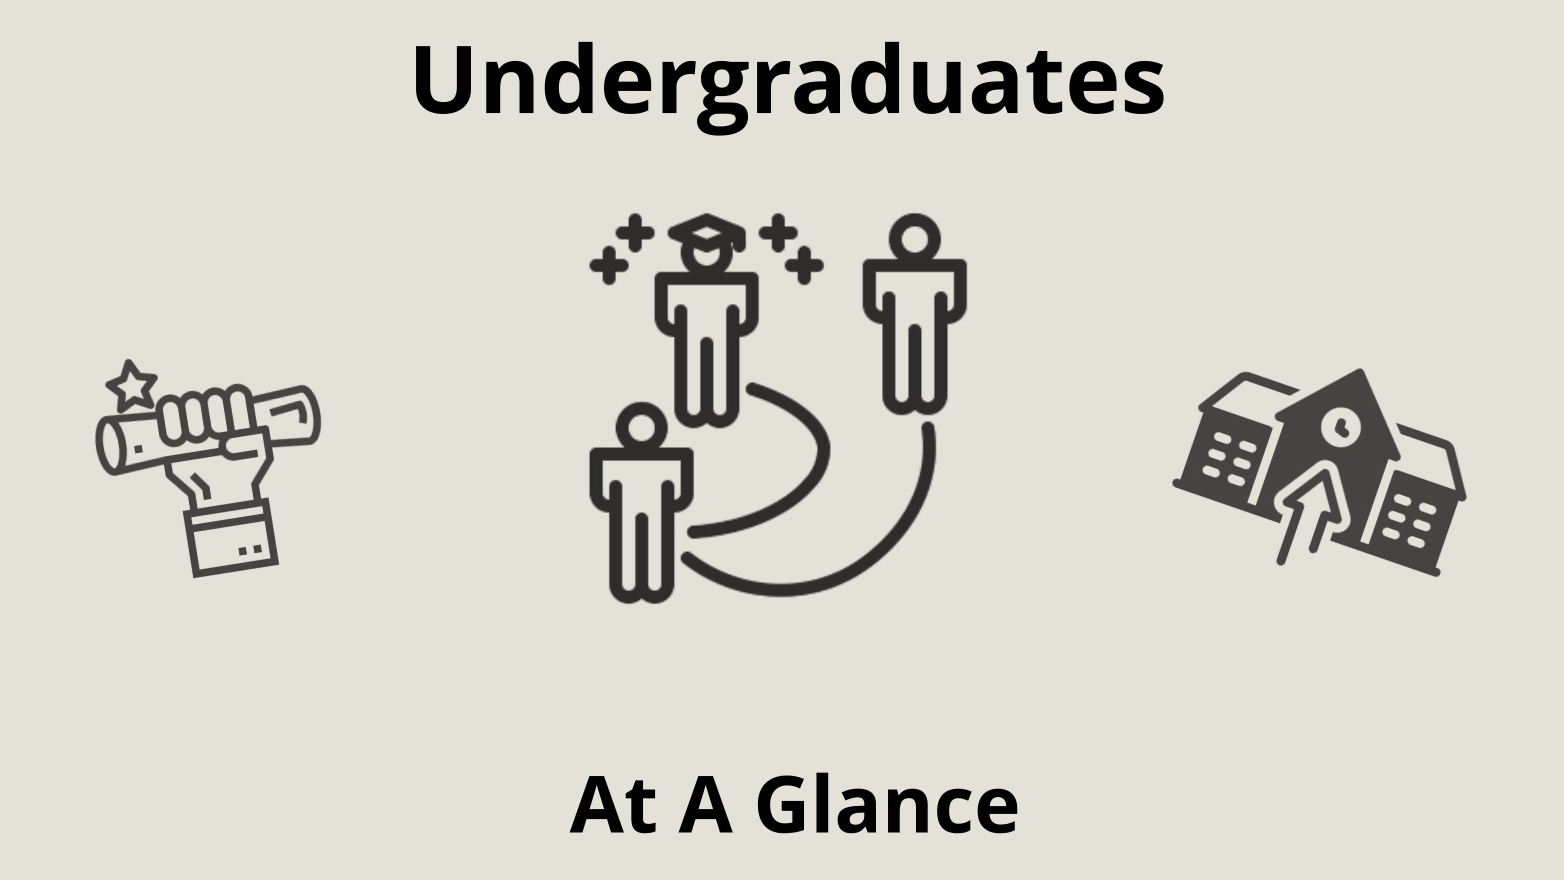 Undergraduate Admissions at a glance